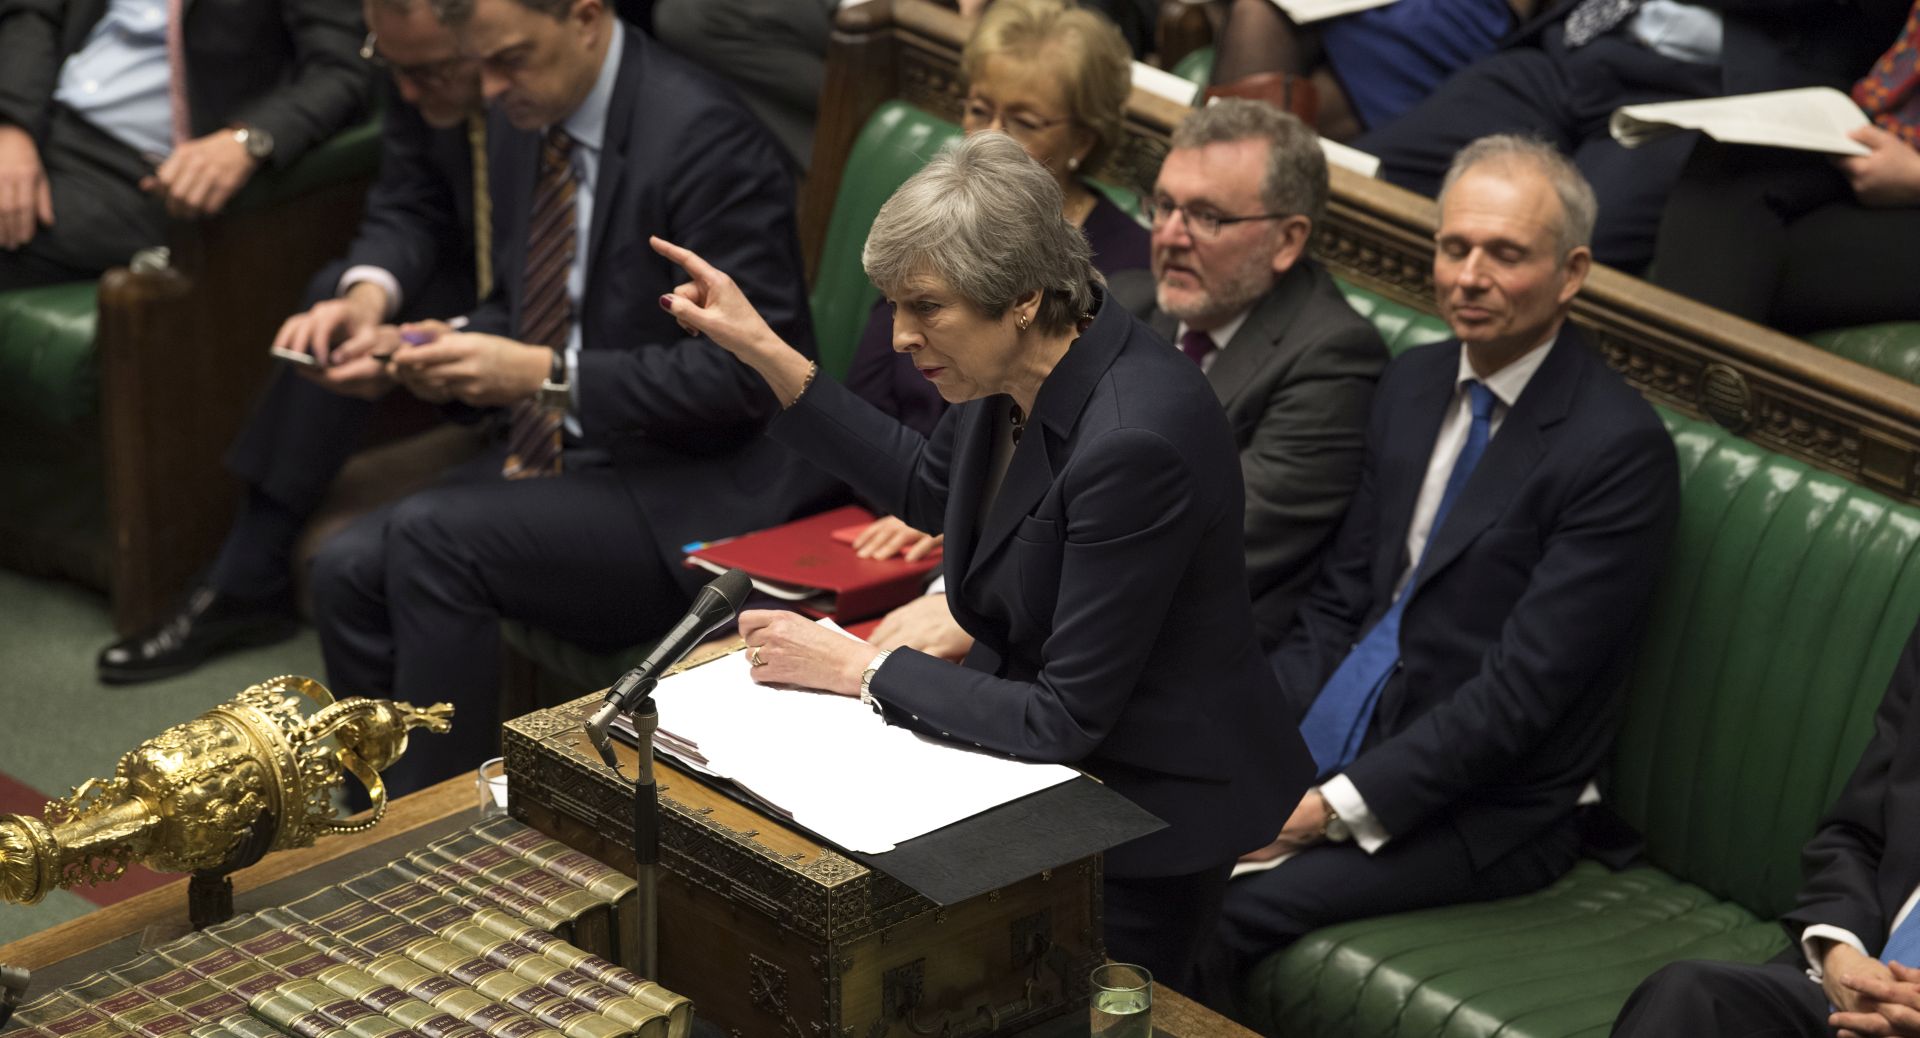 epa07467668 A handout photo made available by by the UK Parliament shows British Prime Minister Theresa May speaking in the British House of Commons at Westminster, London, Britain, 27 March 2019. The British Houses of Parliament are due to hold a number of indicative votes on the direction of Brexit later in the day to have a greater say in the direction of Brexit.  EPA/MARK DUFFY / UK PARLIAMENT HANDOUT MANDATORY CREDIT: UK PARLIAMENT HANDOUT EDITORIAL USE ONLY/NO SALES